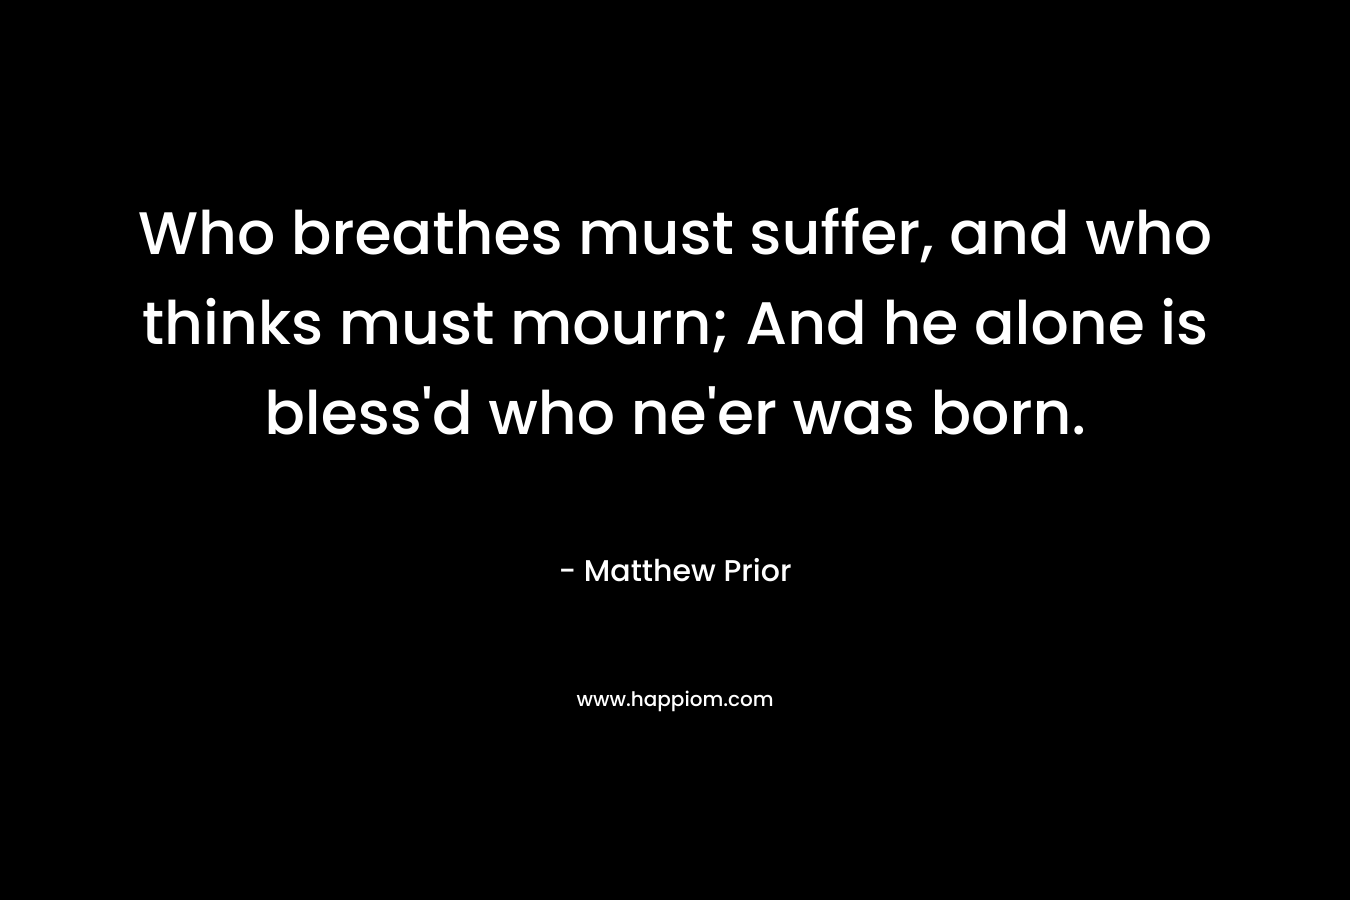 Who breathes must suffer, and who thinks must mourn; And he alone is bless’d who ne’er was born. – Matthew Prior